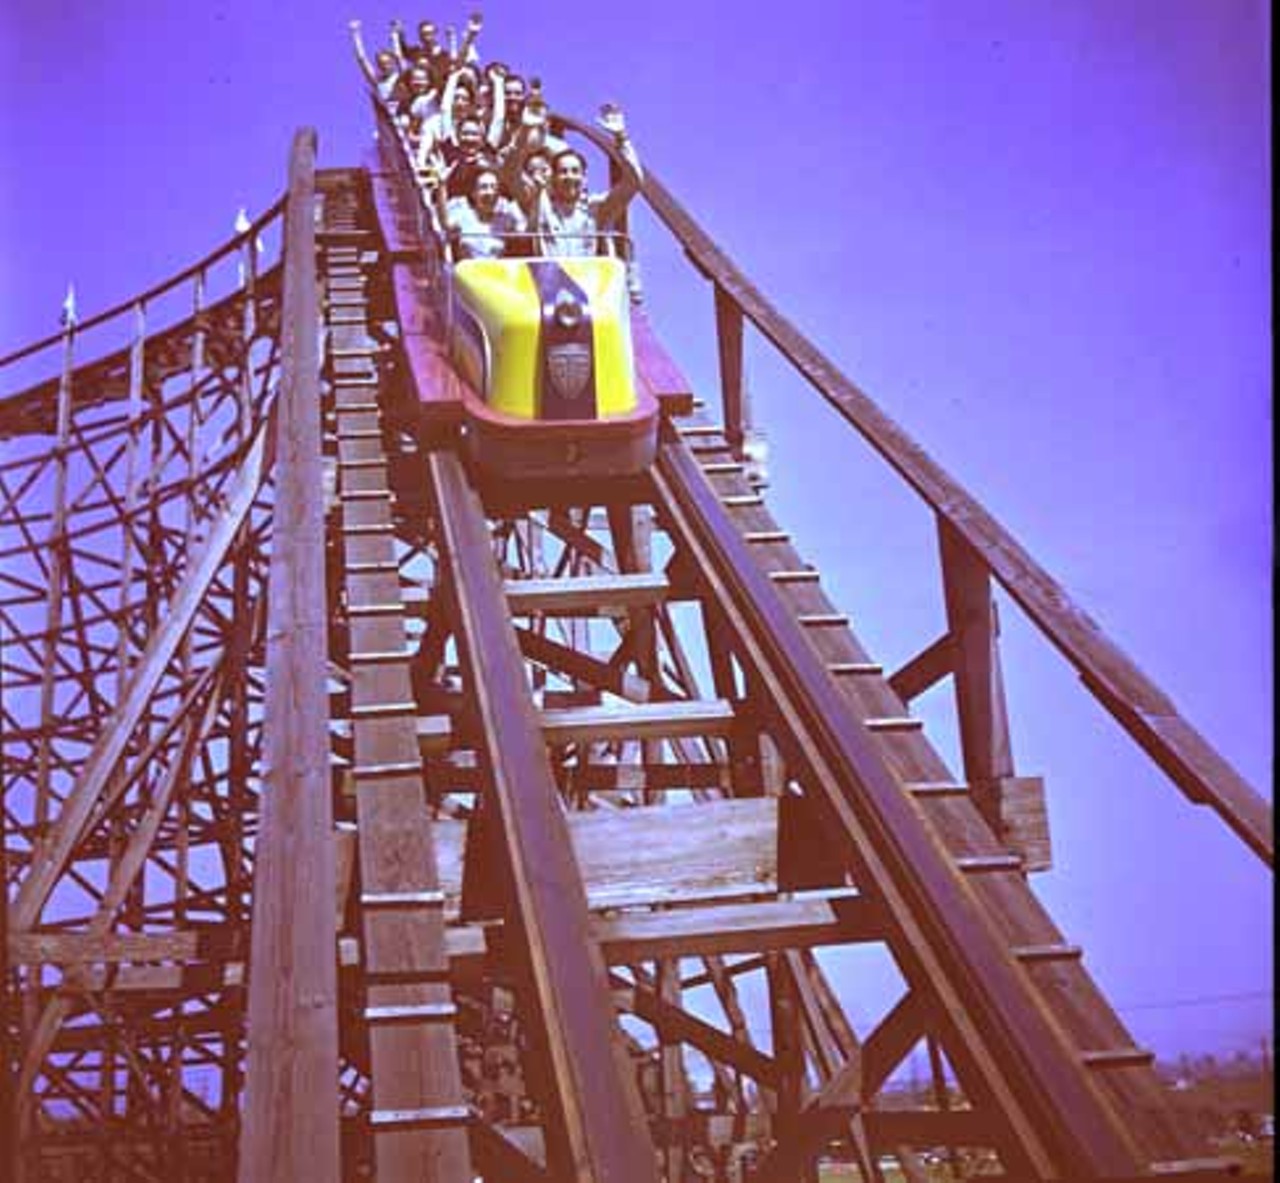 1947. The Comet Rollercoaster was designed by Herbert Schmeck. It stood 85 feet high, 3,120 feet long and had a 300 foot tunnel.